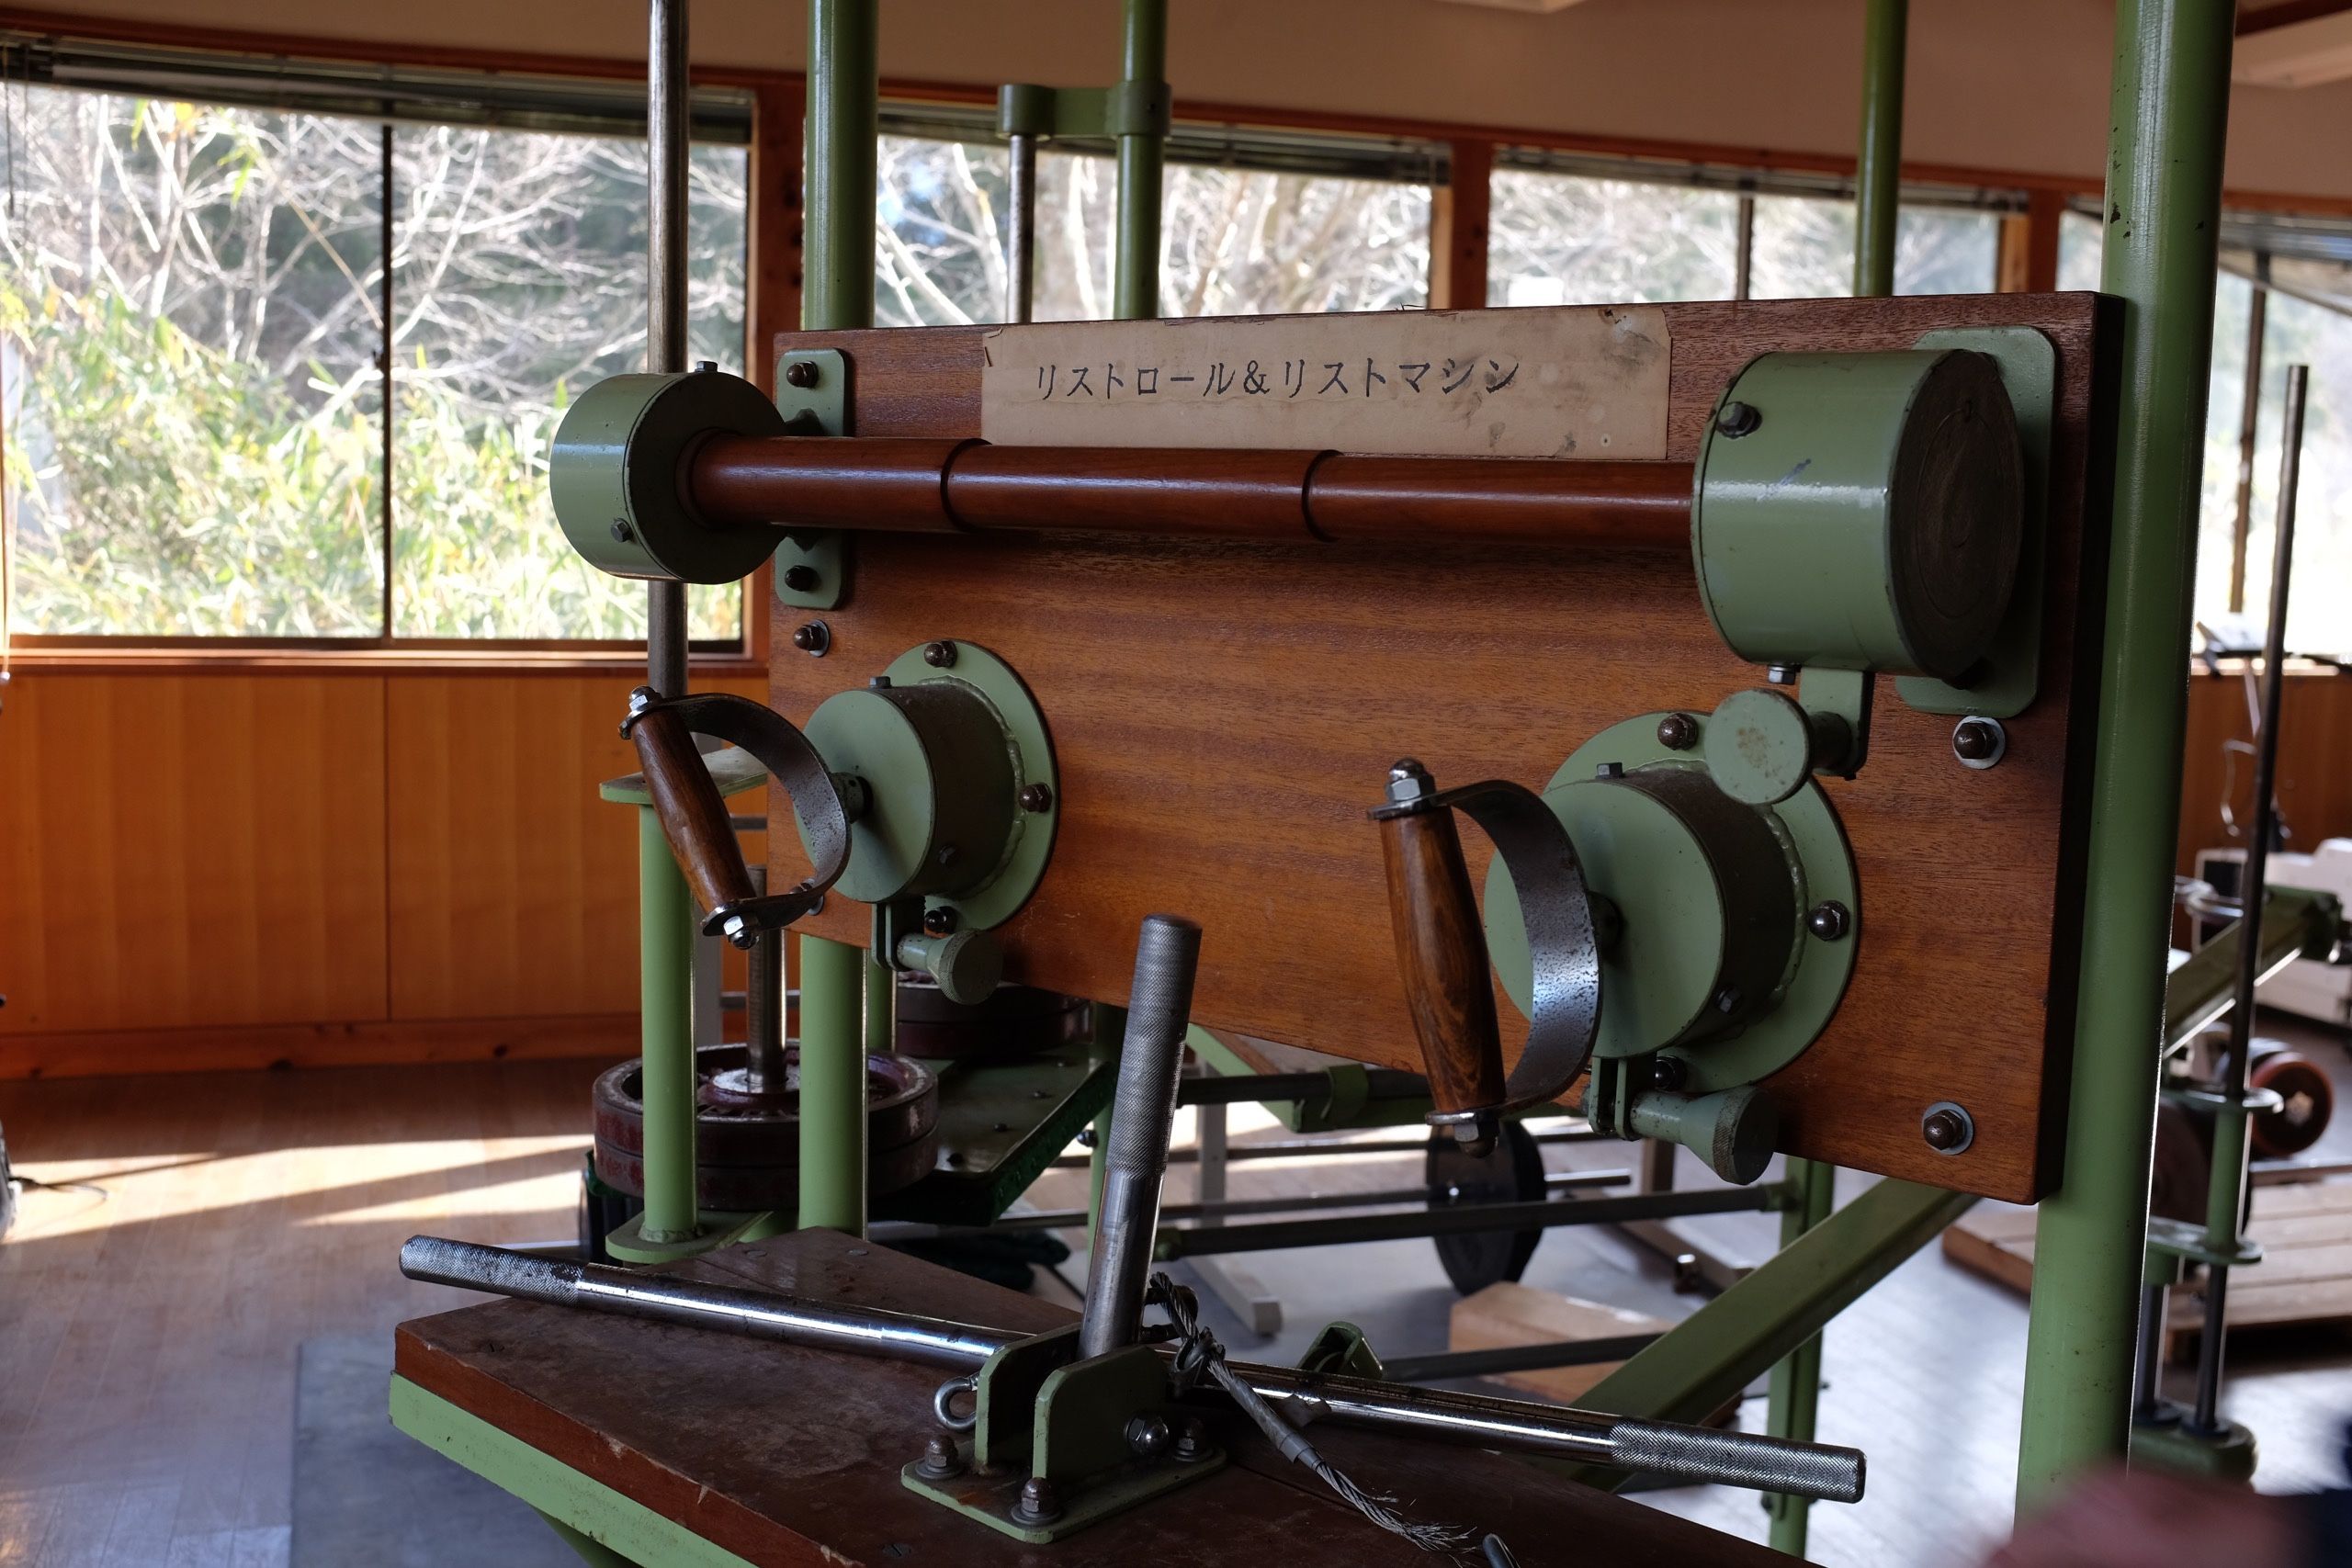 An old exercise machine, made of wood and green painted metal, in an old, sunlit room.